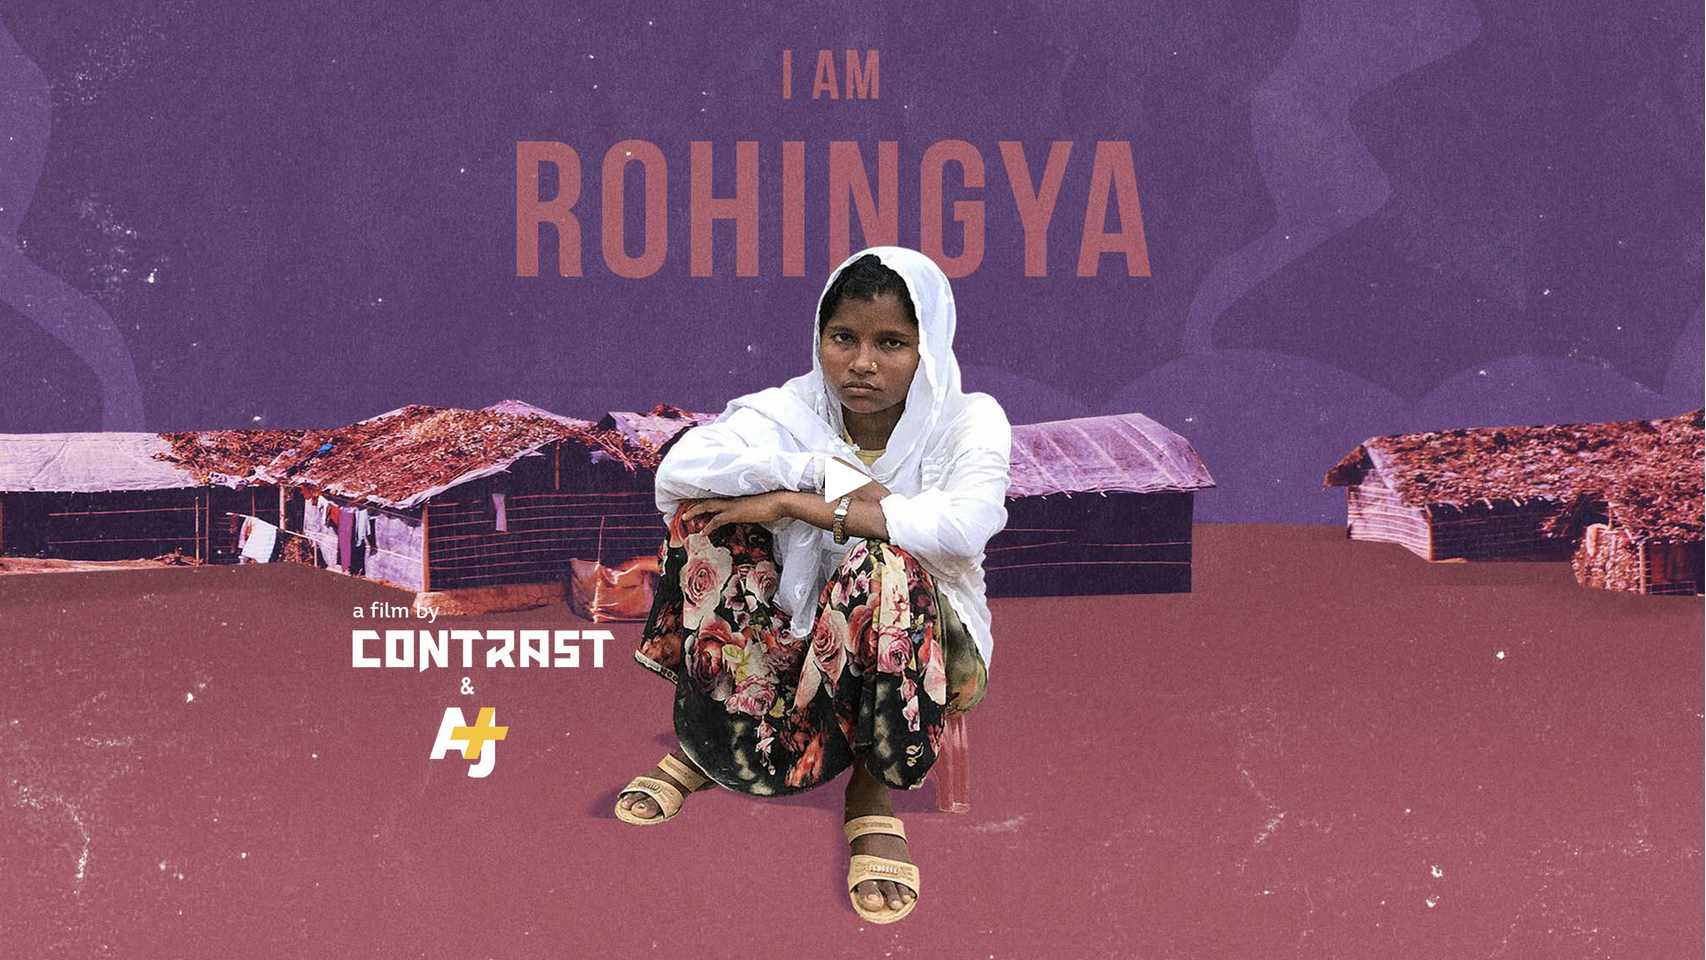 A young Rohingya woman sitting in front of a backdrop of a refugee camp and the words 'I Am Rohingya'.